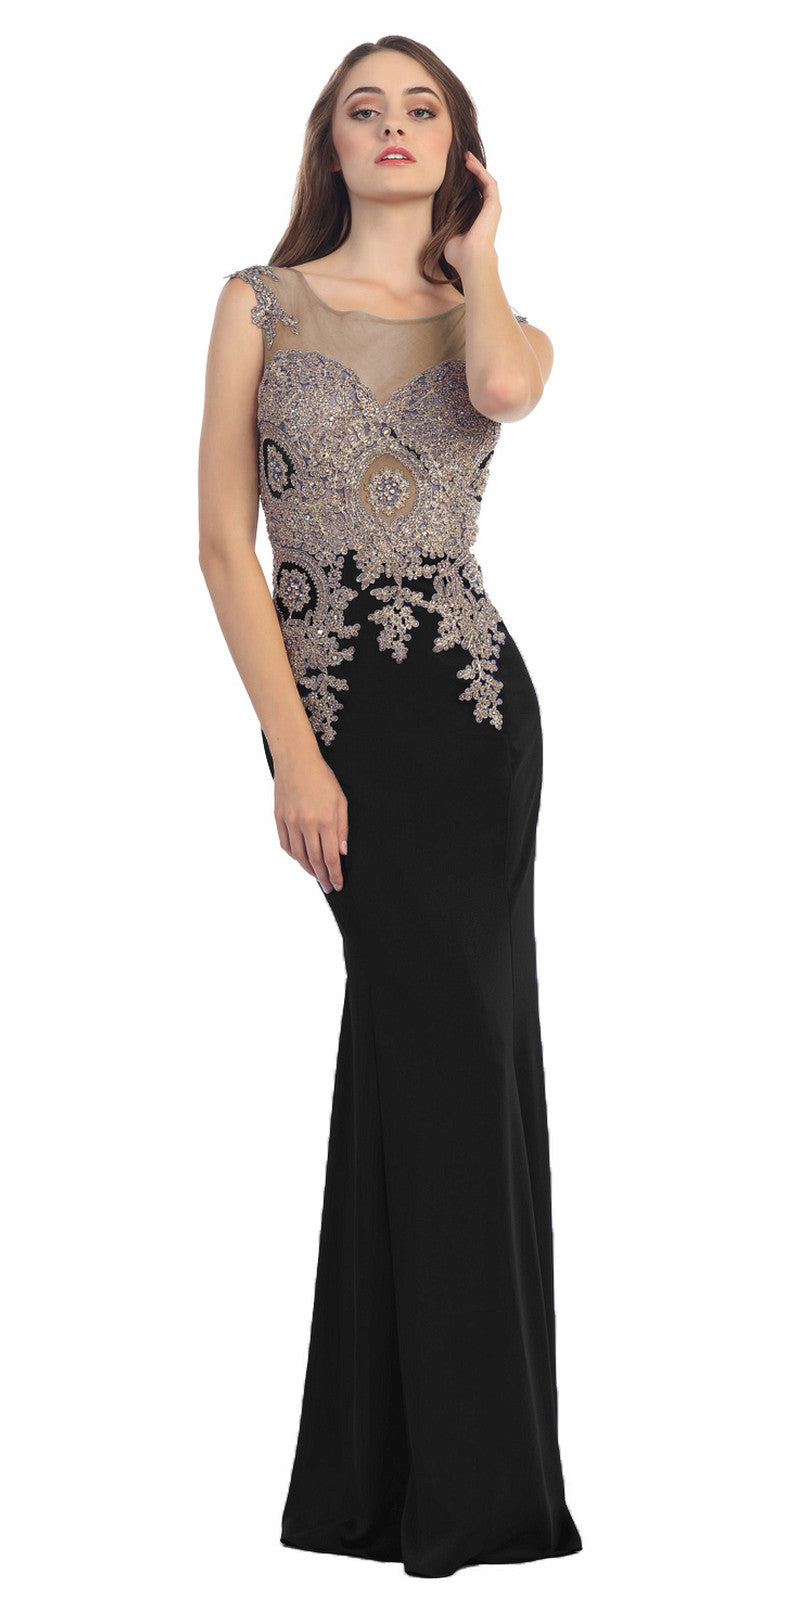 Stretch Satin ITY Formal Gown Black Embroidery Illusion Neck